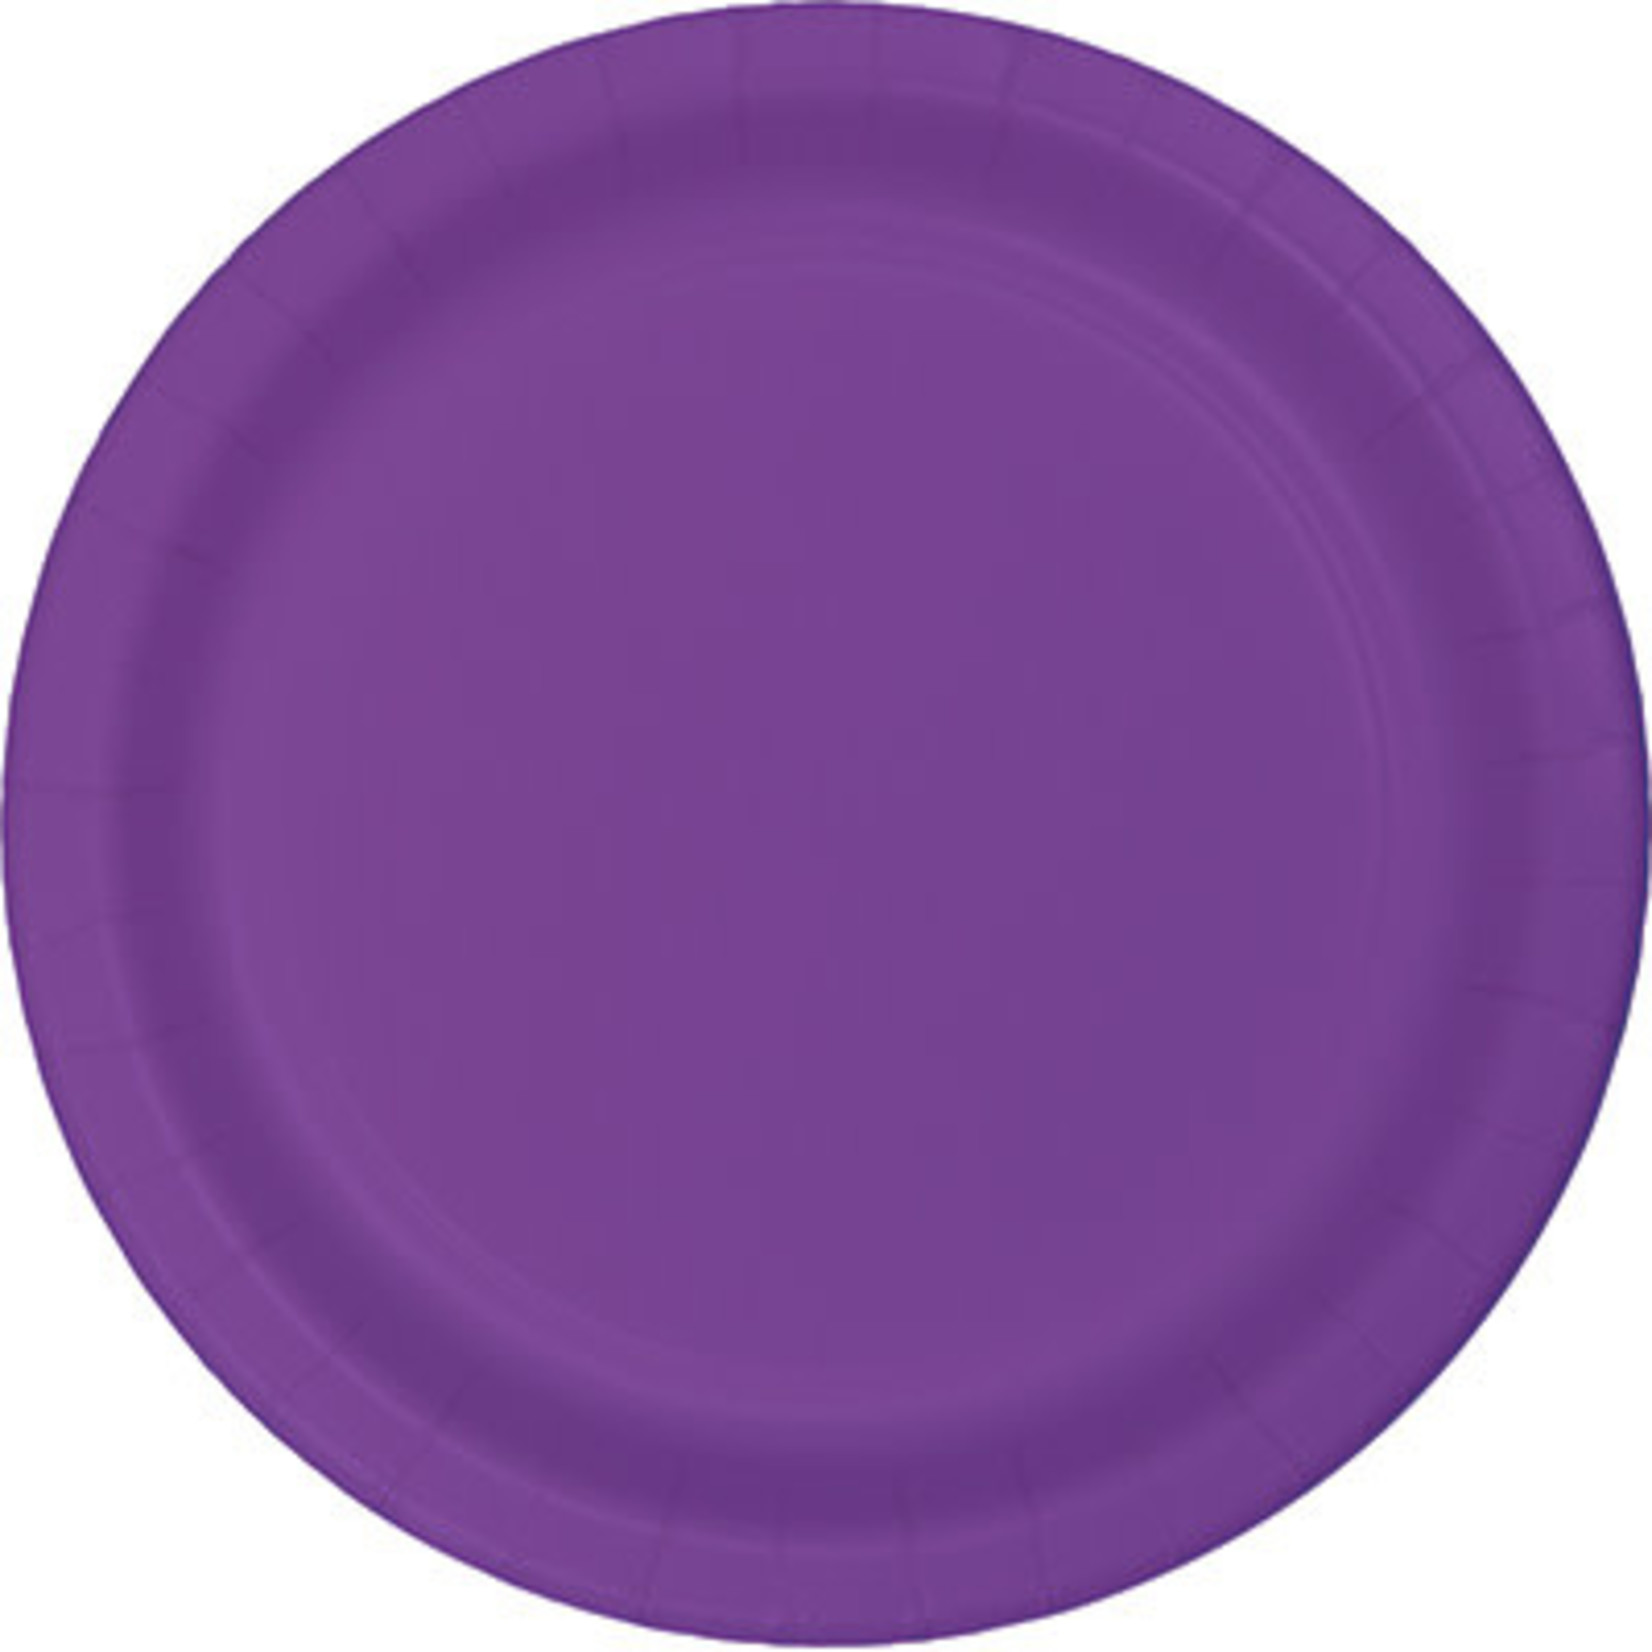 Touch of Color 10" Amethyst Purple Paper Banquet Plates - 24ct.